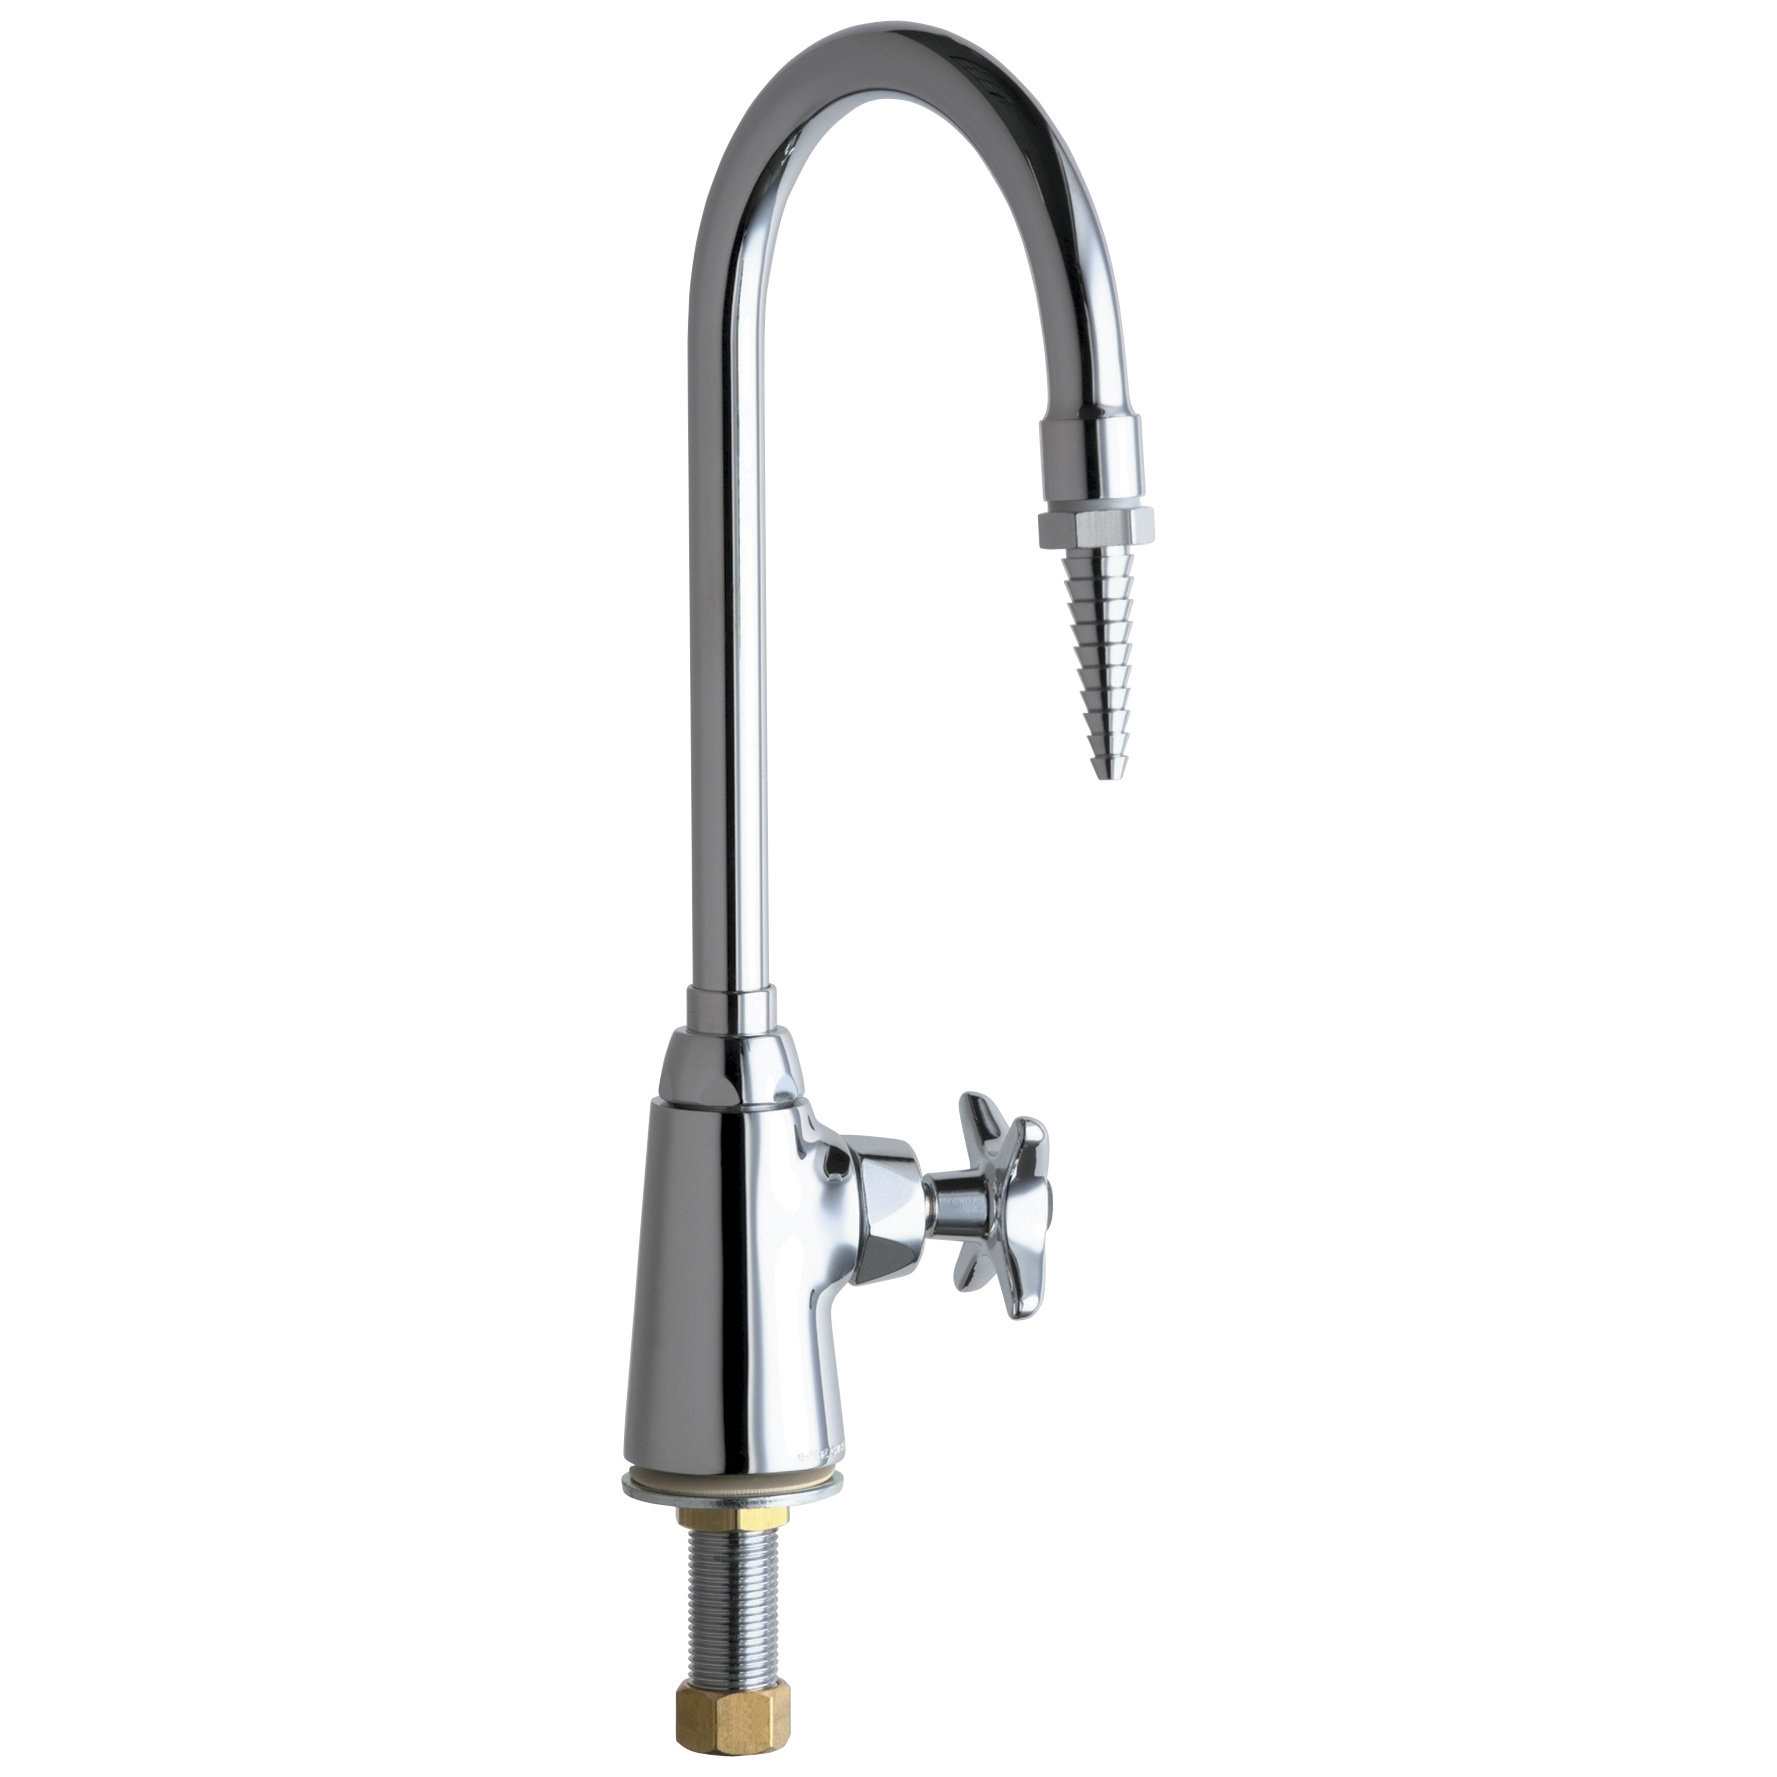 Deck-Mounted Manual Lab Faucet In Polished Chrome